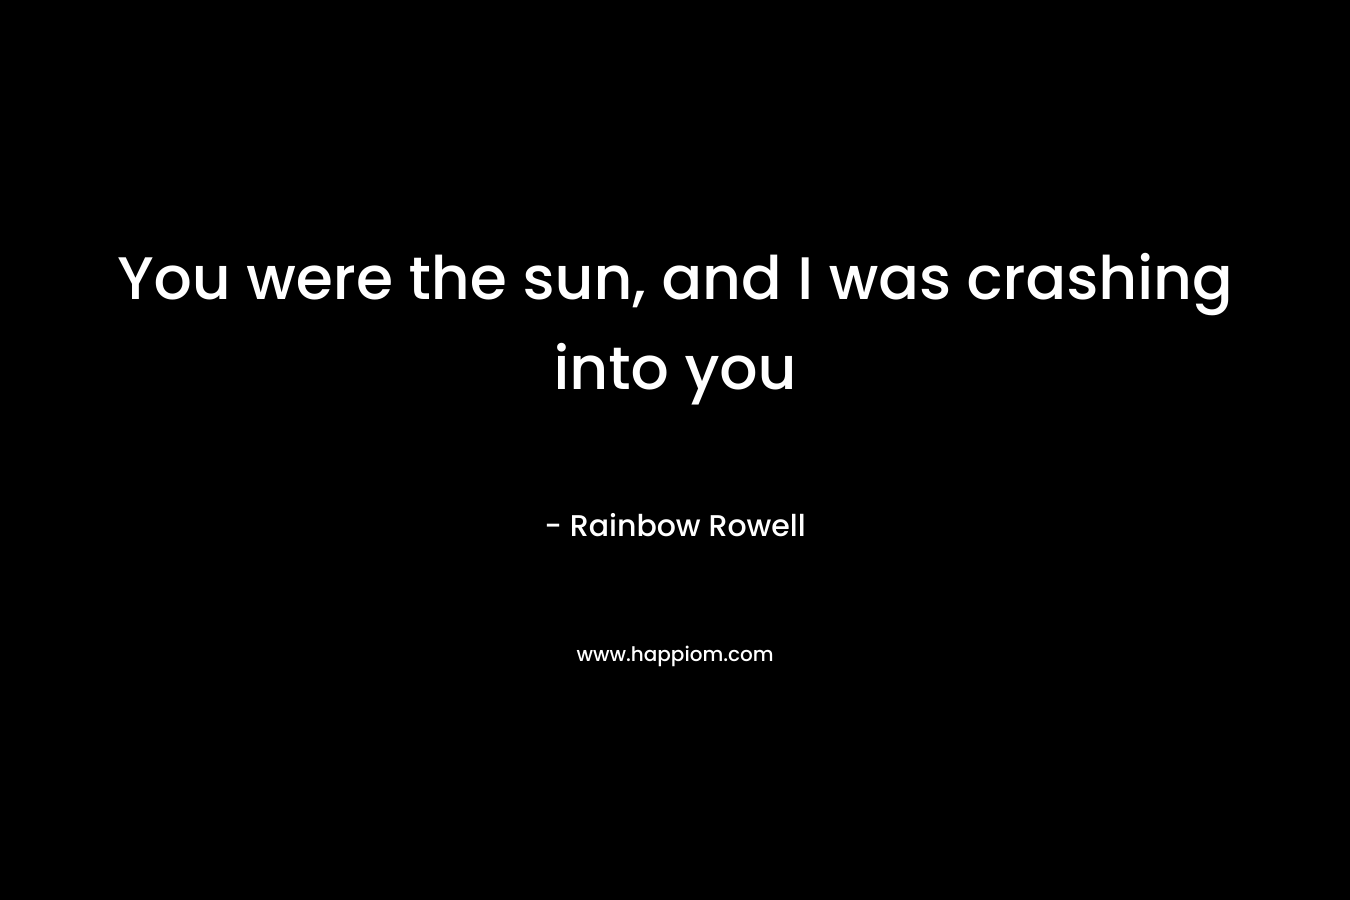 You were the sun, and I was crashing into you – Rainbow Rowell